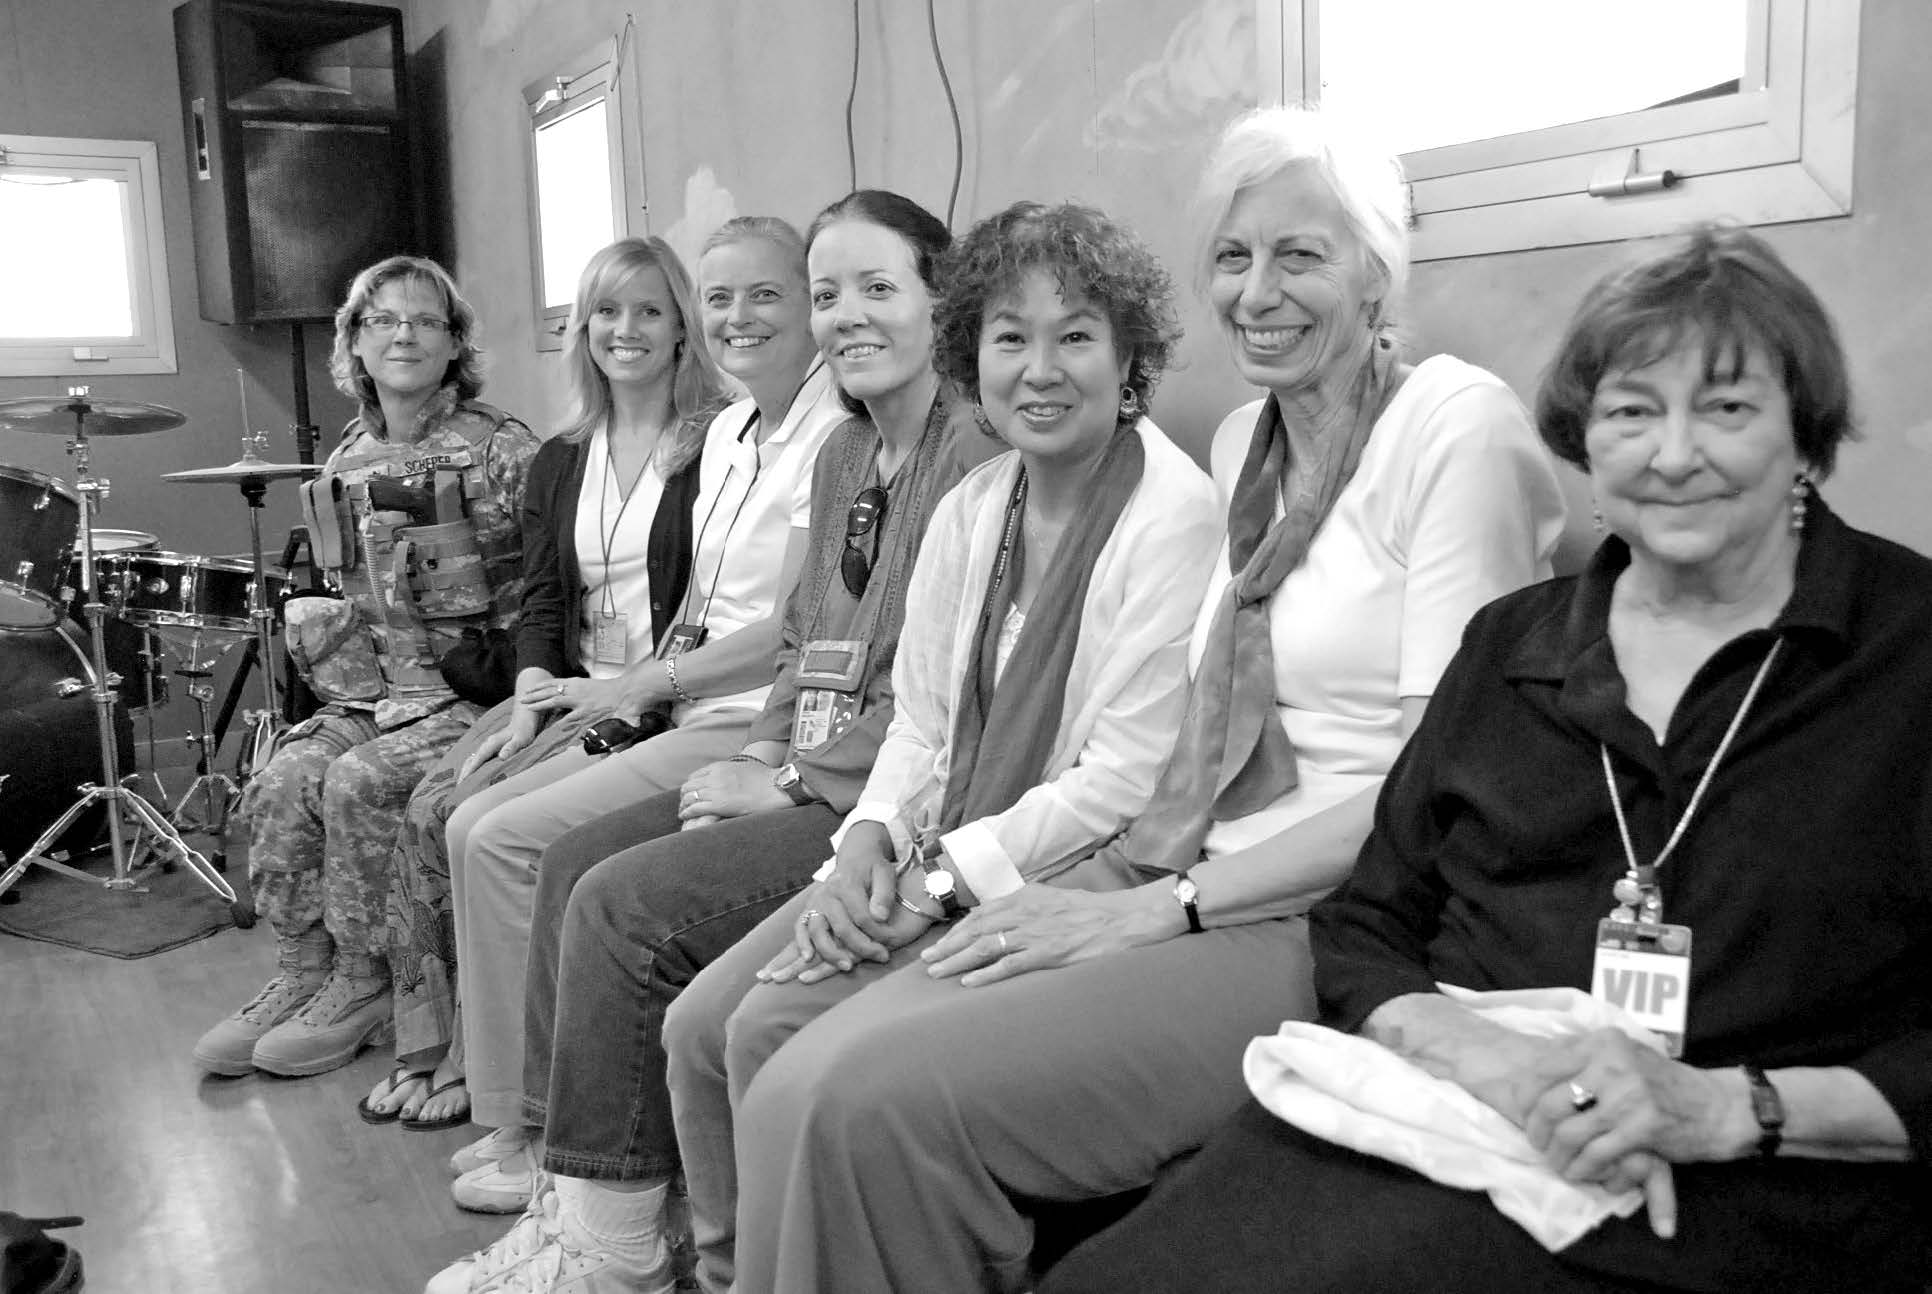 This is the first photo taken of the Kabul Military Branch Relief Society. From left to right: Daffney Scherer (who is armed), Margaret Owens, Bonnie Anderson, Libby Brown, Kyoko Wilson, Carol Wilson, and Barbara Thompson. Courtesy of Eugene J. Wikle.